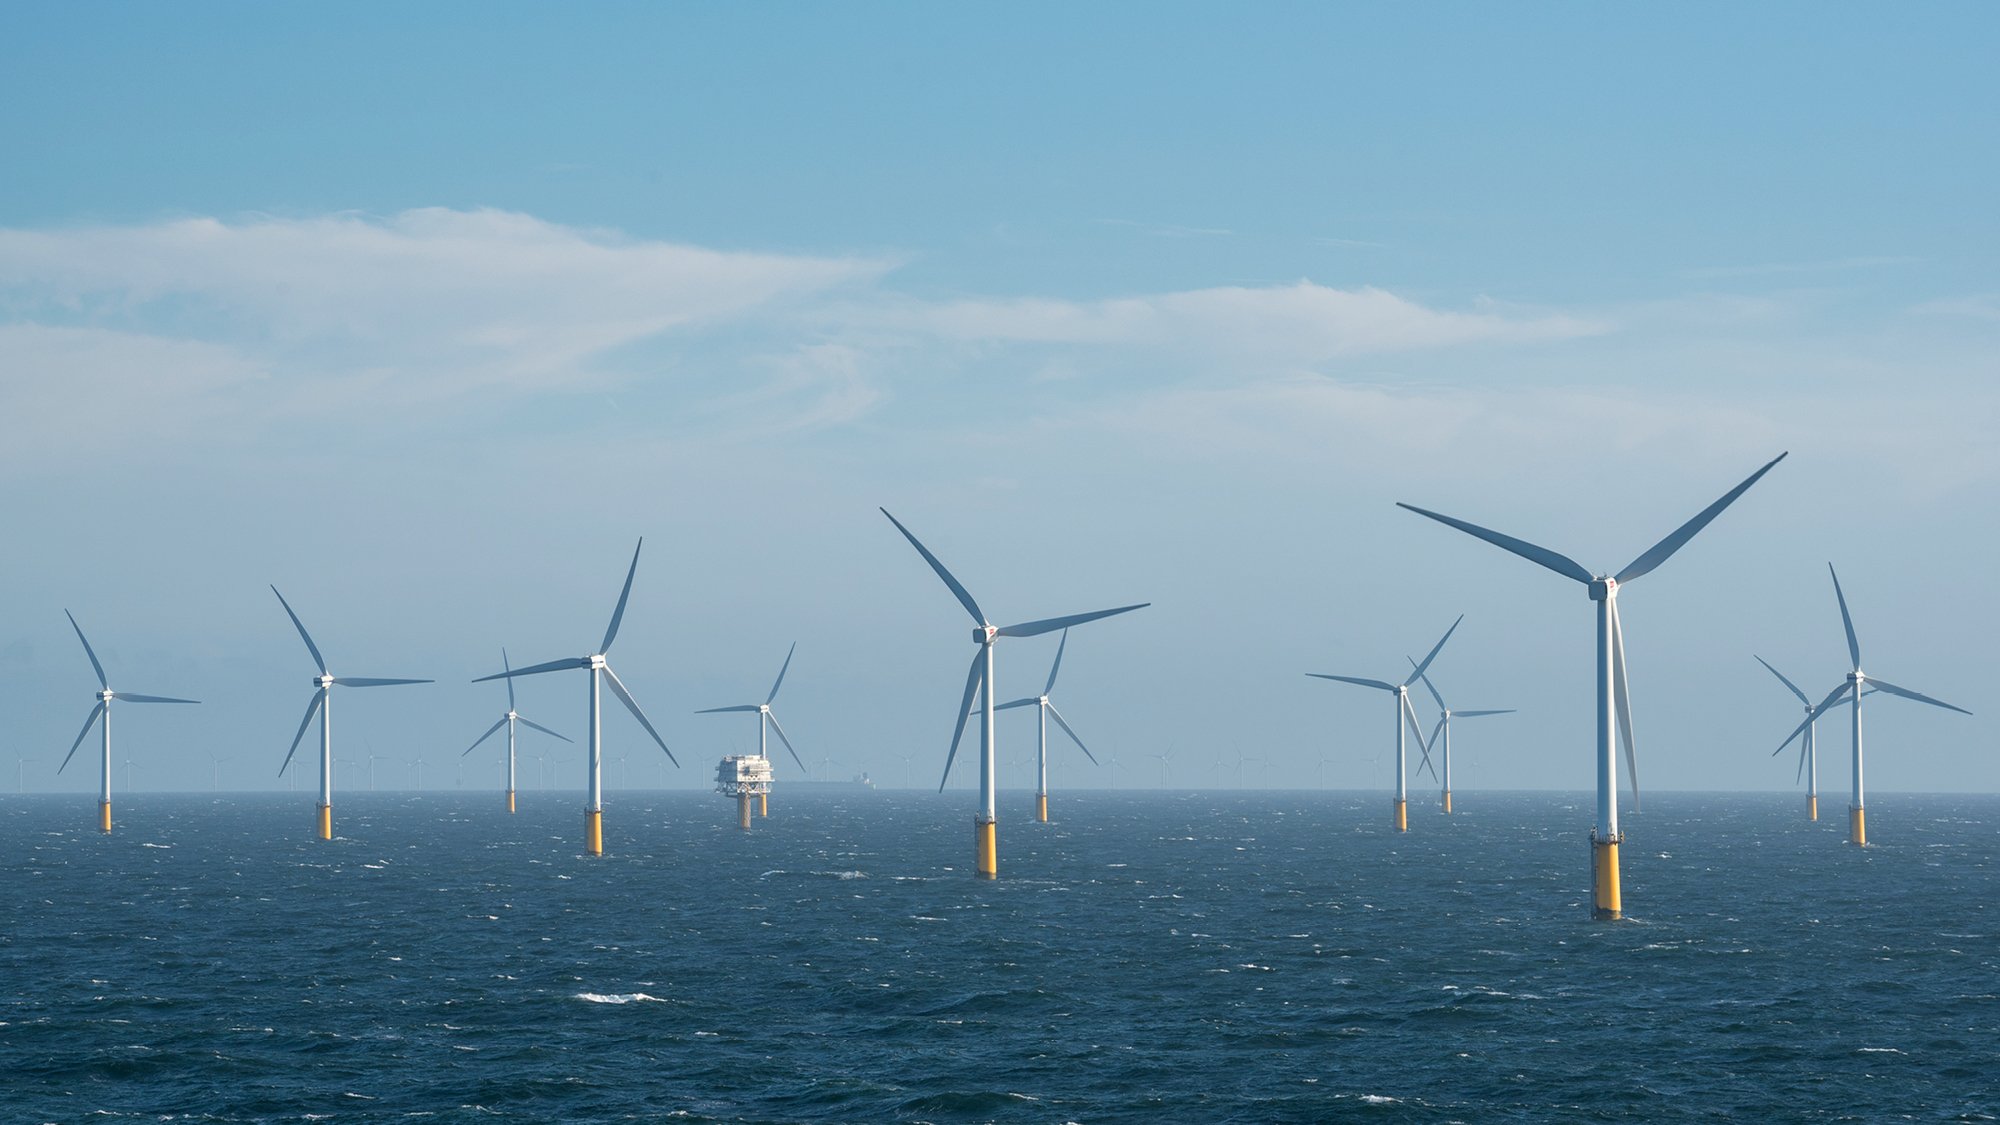 A group of wind turbines in the ocean at an offshore wind farm